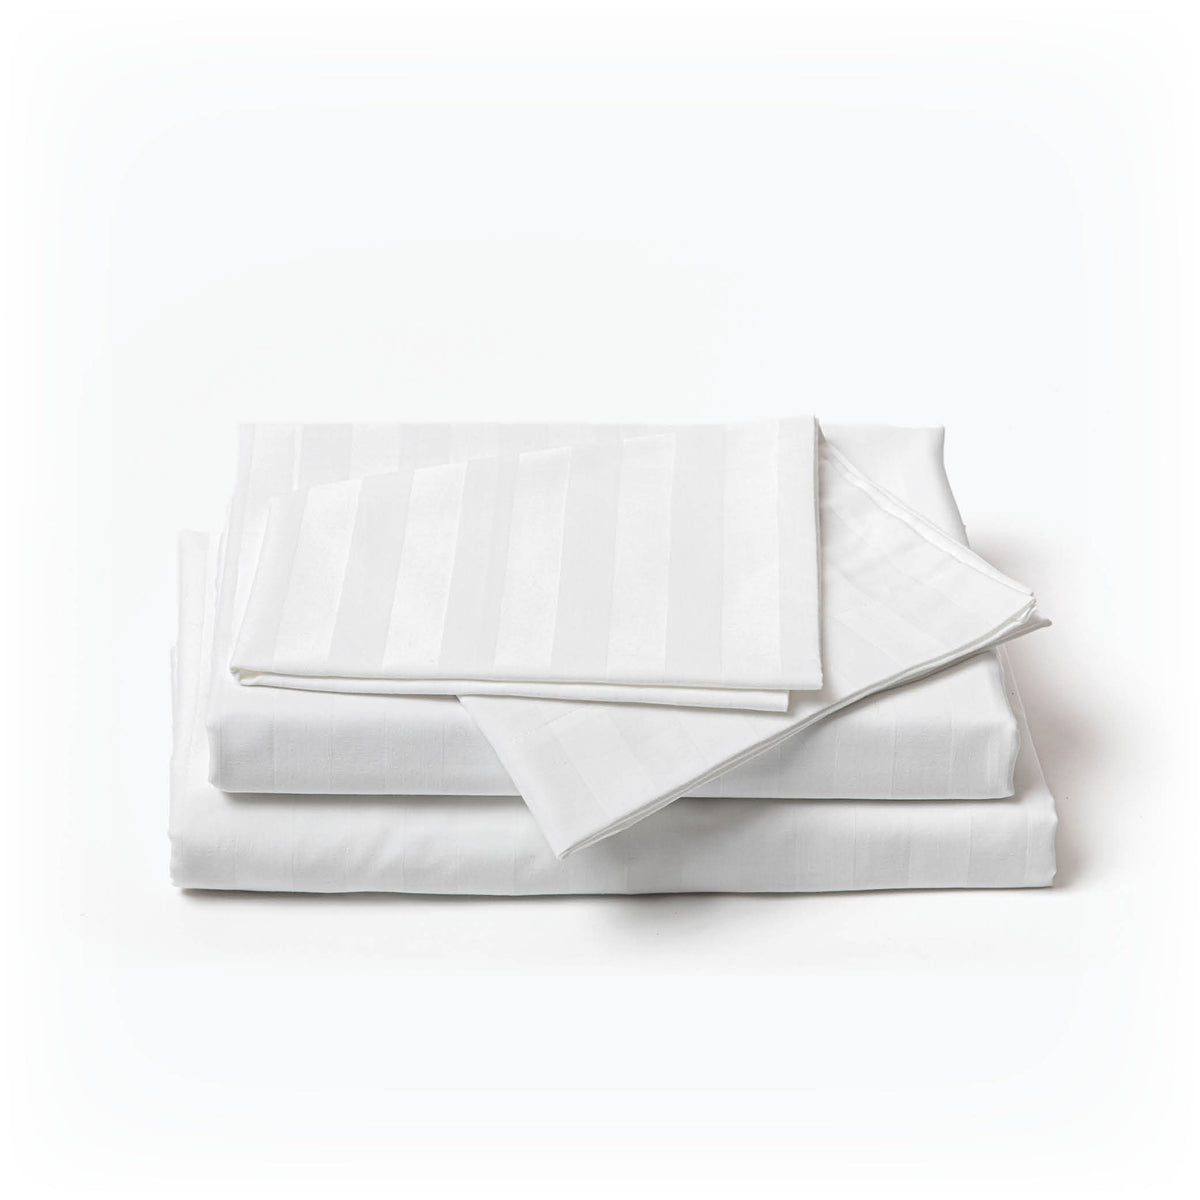 Image showcasing the entire White Luxury Resort Hotel Collection Classic Cotton Sheet Set. It includes (pictured top to bottom): two folded pillowcases, one flat sheet, and one fitted sheet